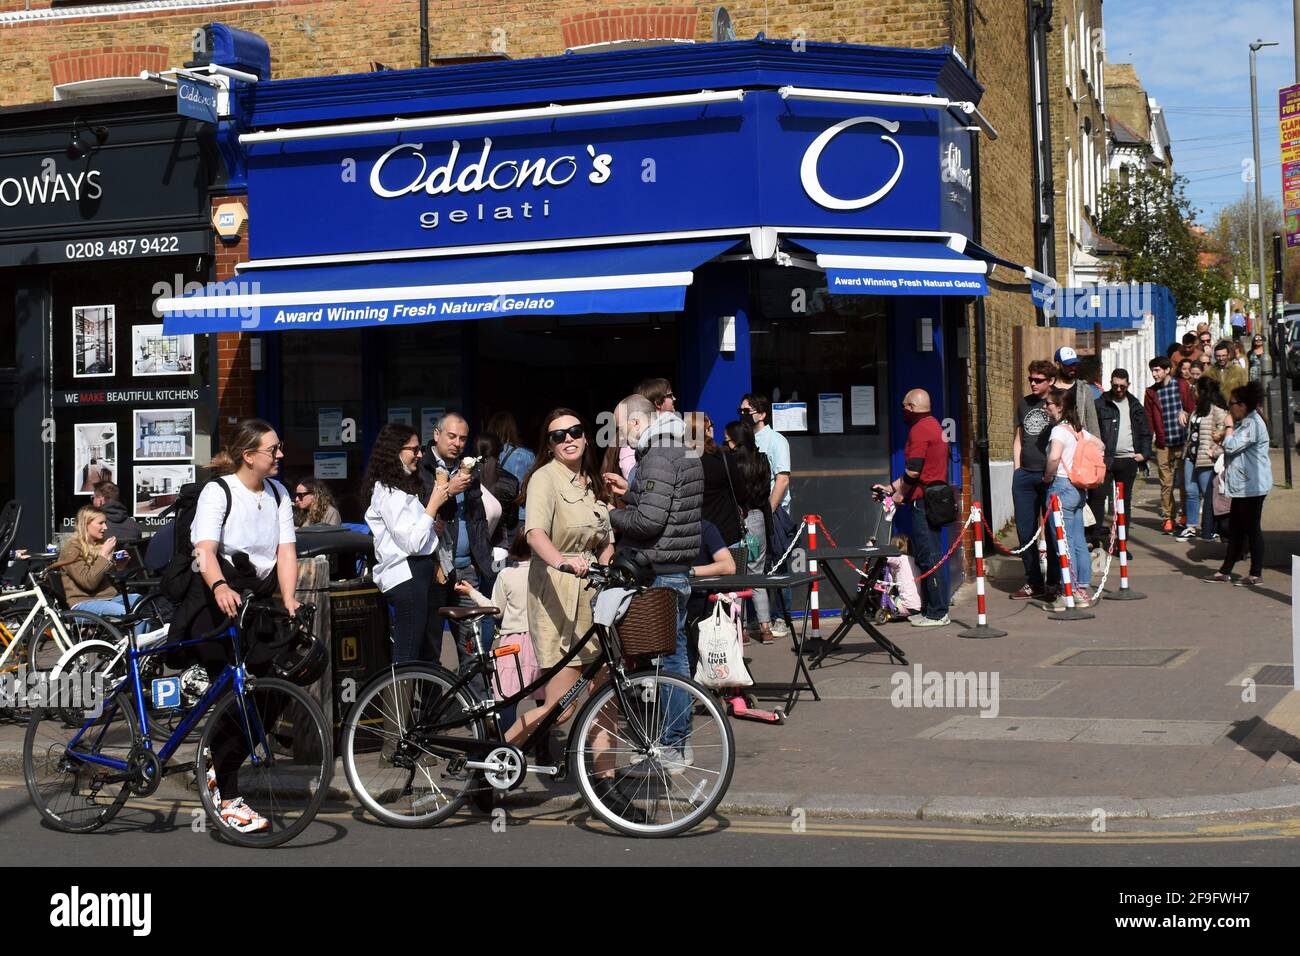 London, UK. 18th Apr, 2021. Oddono's Gelati Italiani. Northcote road pedestrianised to allow businesses to recover after lockdown. Sunshine on Sunday as pubs and restaurants open to the crowds. Credit: JOHNNY ARMSTEAD/Alamy Live News Stock Photo